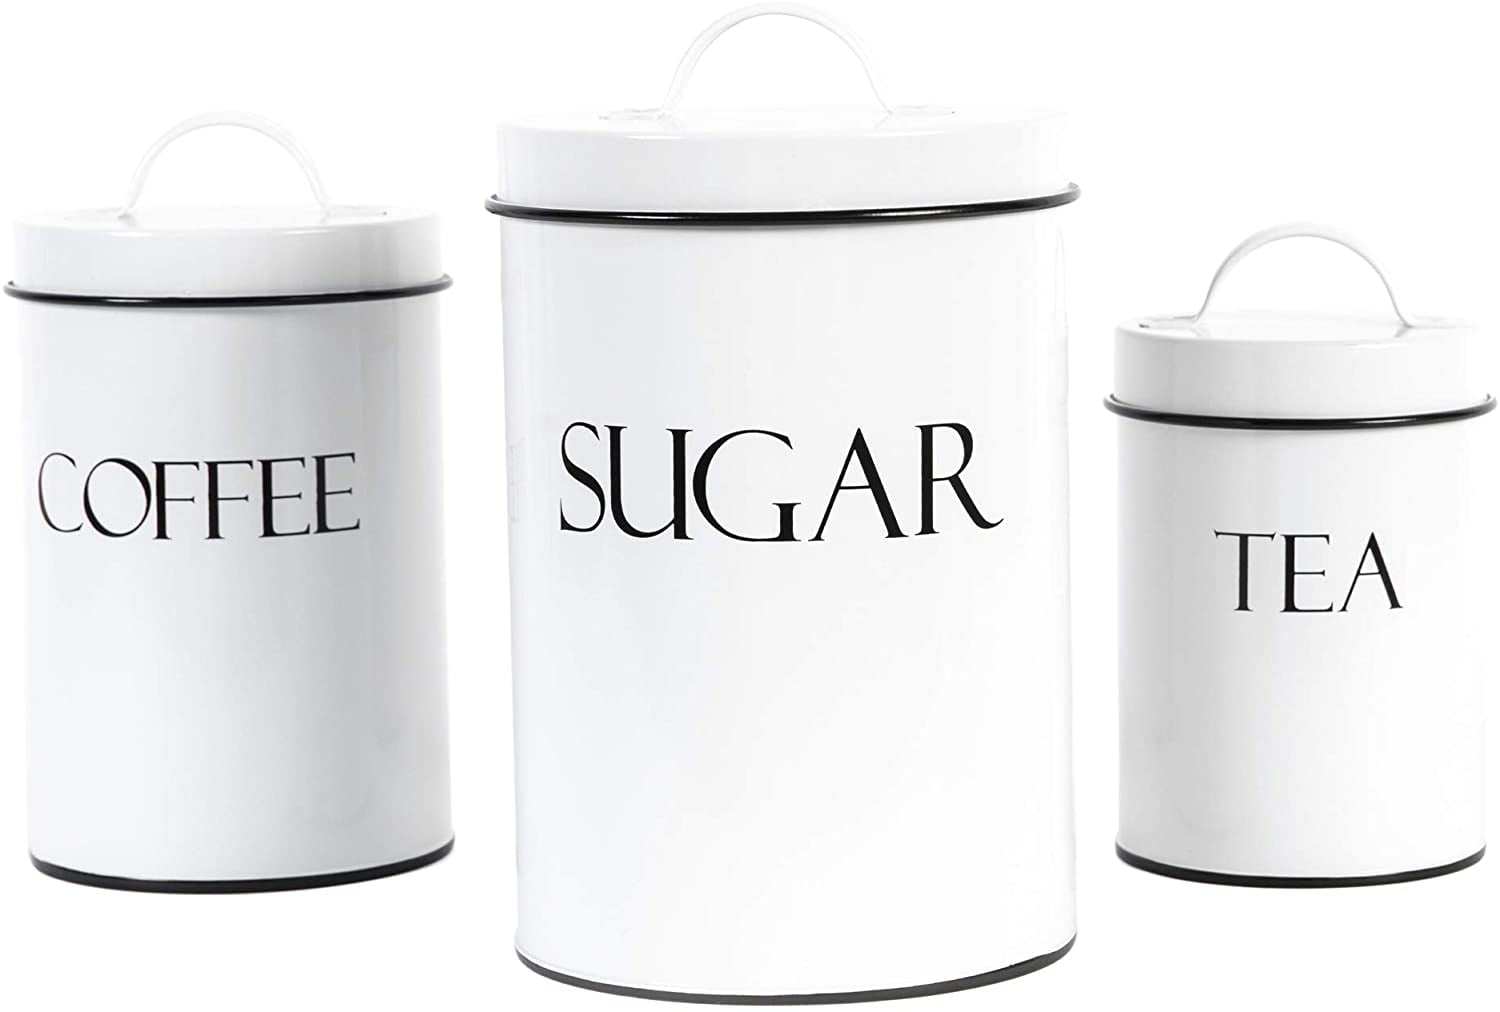 Set Of 3 Tea Coffee Sugar Jars Storage Canisters Air Tight Lid Kitchen Container 